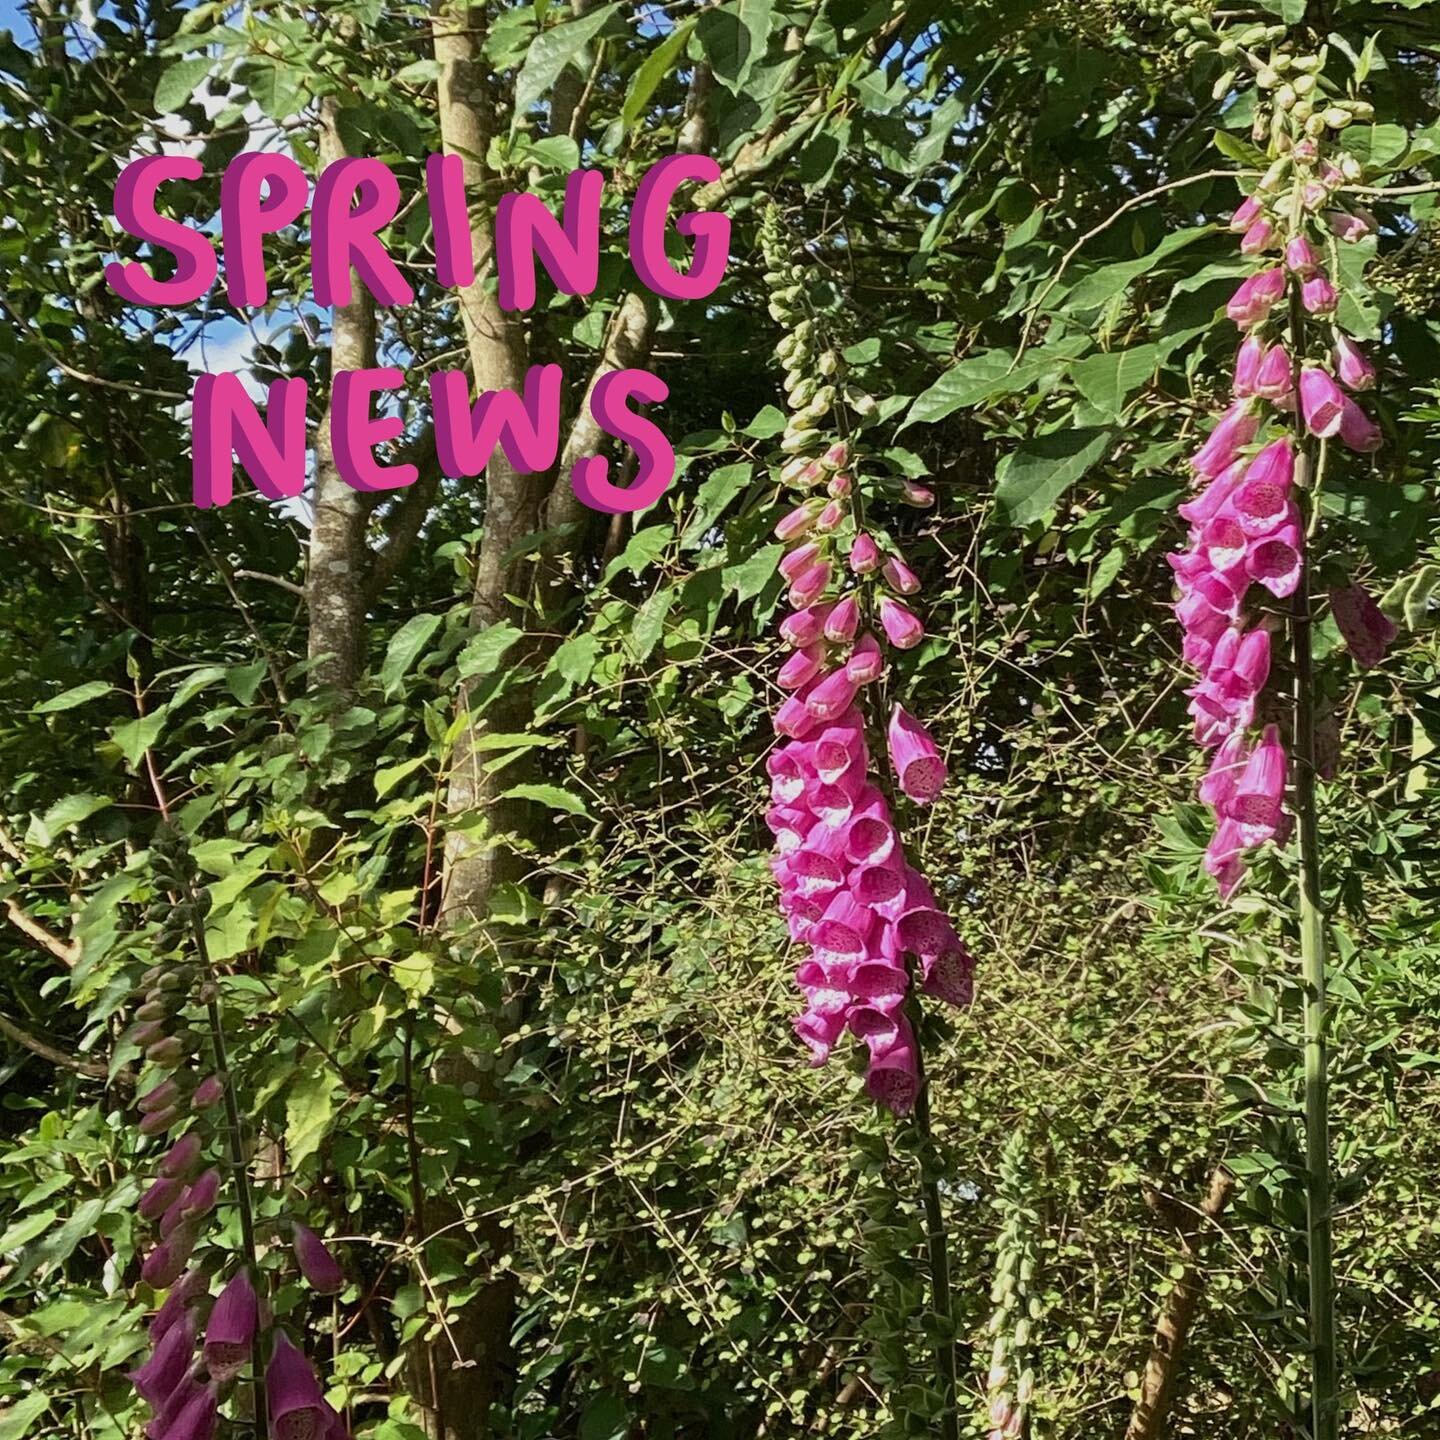 Our spring newsletter is out now. Have a read at the link in bio!

#landaccessnz #landsharingnz #marketgardennz #panuikoanga #villageagrarians